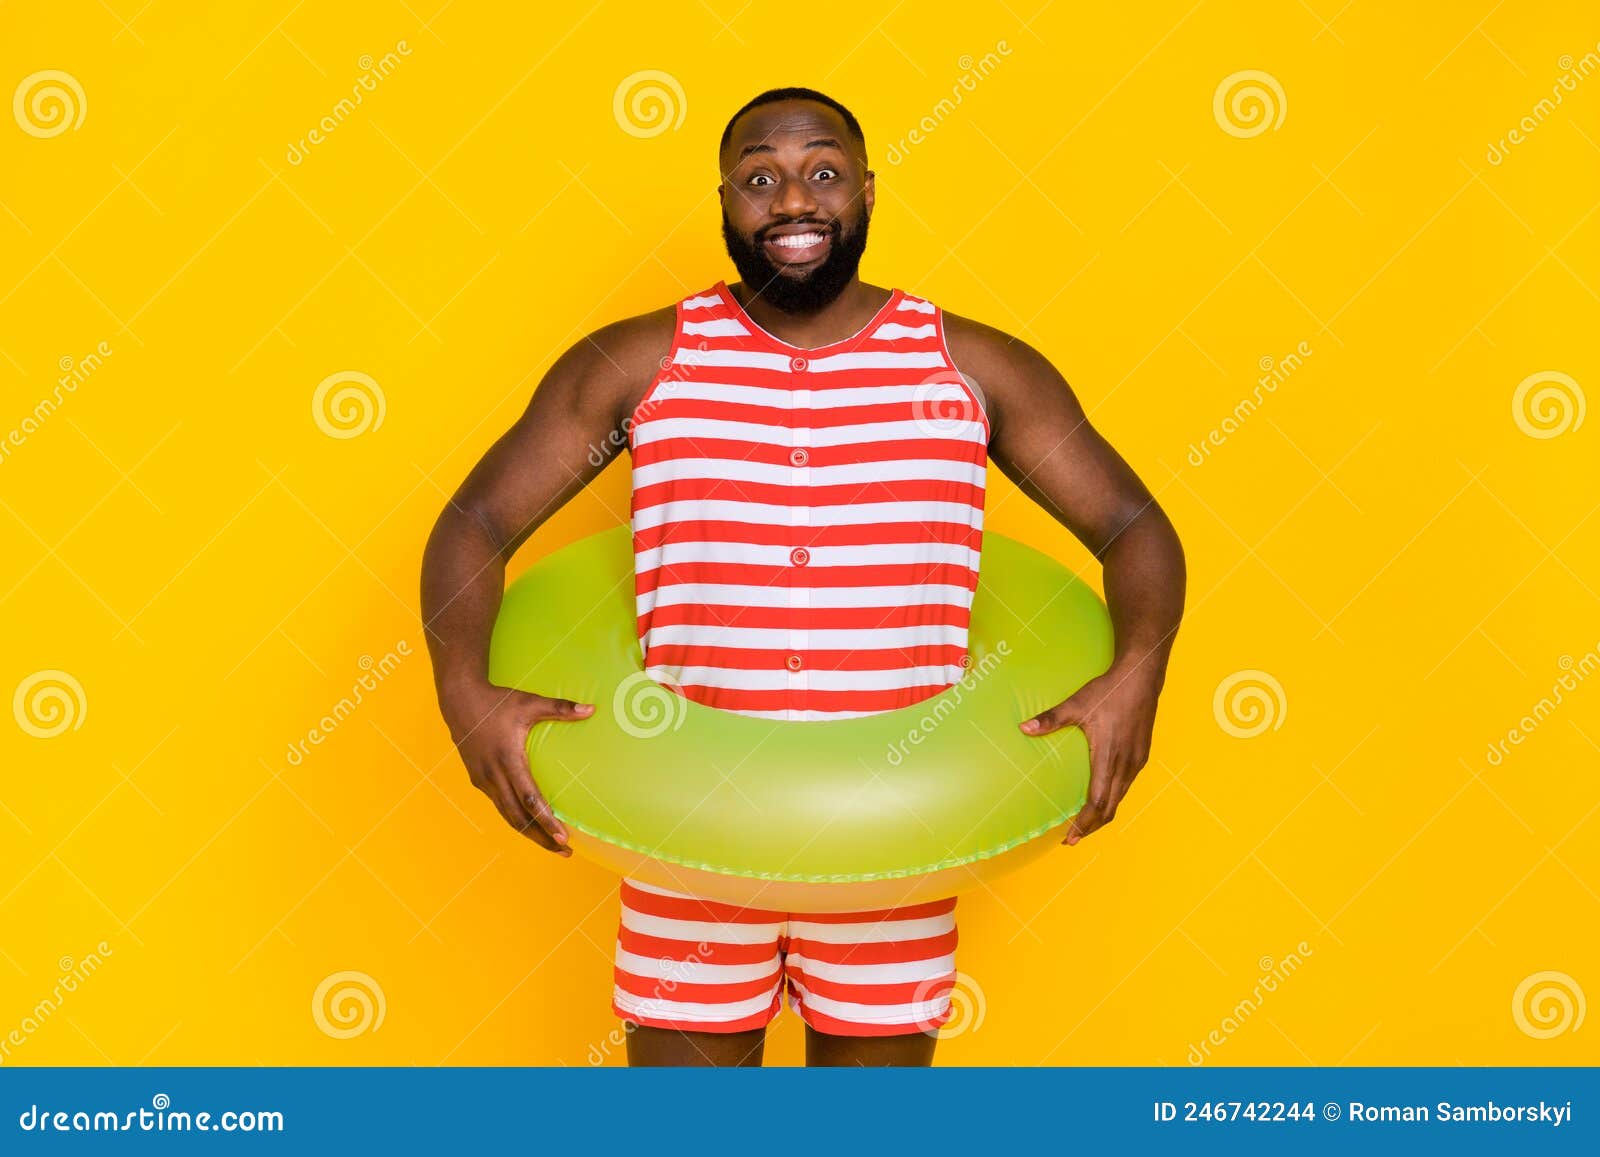 https://thumbs.dreamstime.com/z/photo-guy-hold-lifesaver-ring-swim-sea-ocean-wear-red-striped-set-overall-shorts-isolated-bright-color-background-246742244.jpg